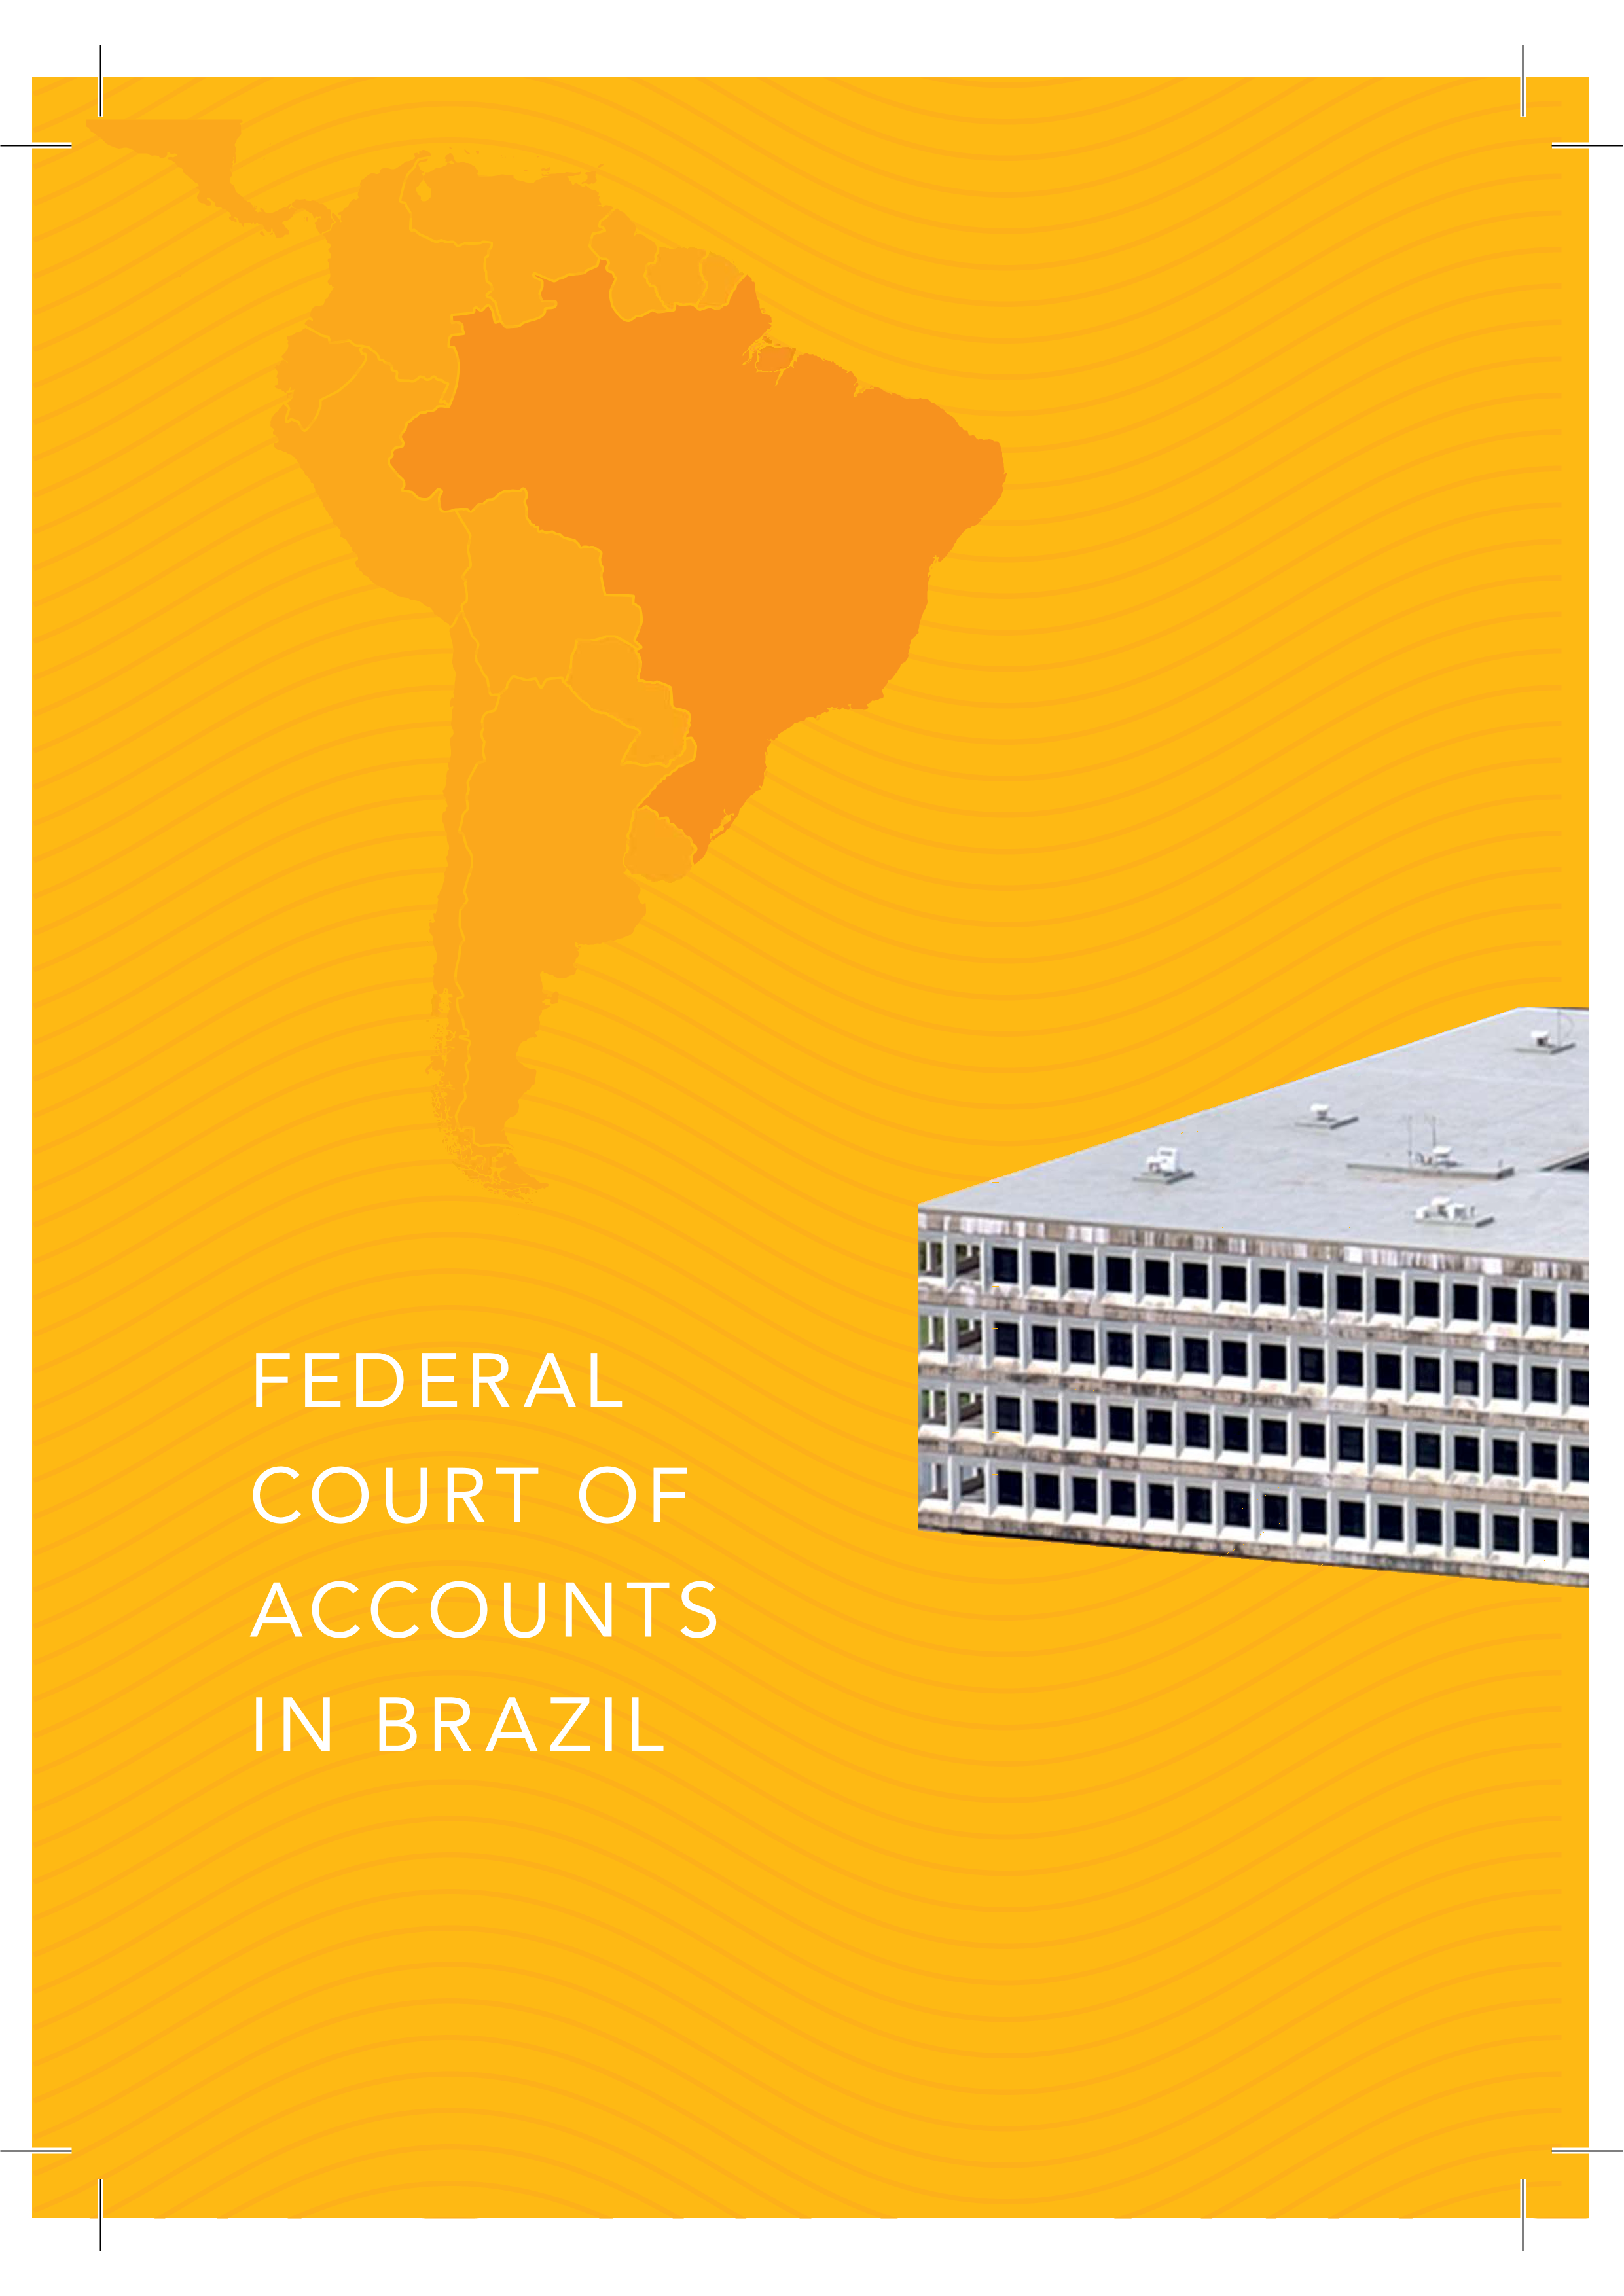 federal court of accounts in brazil.png